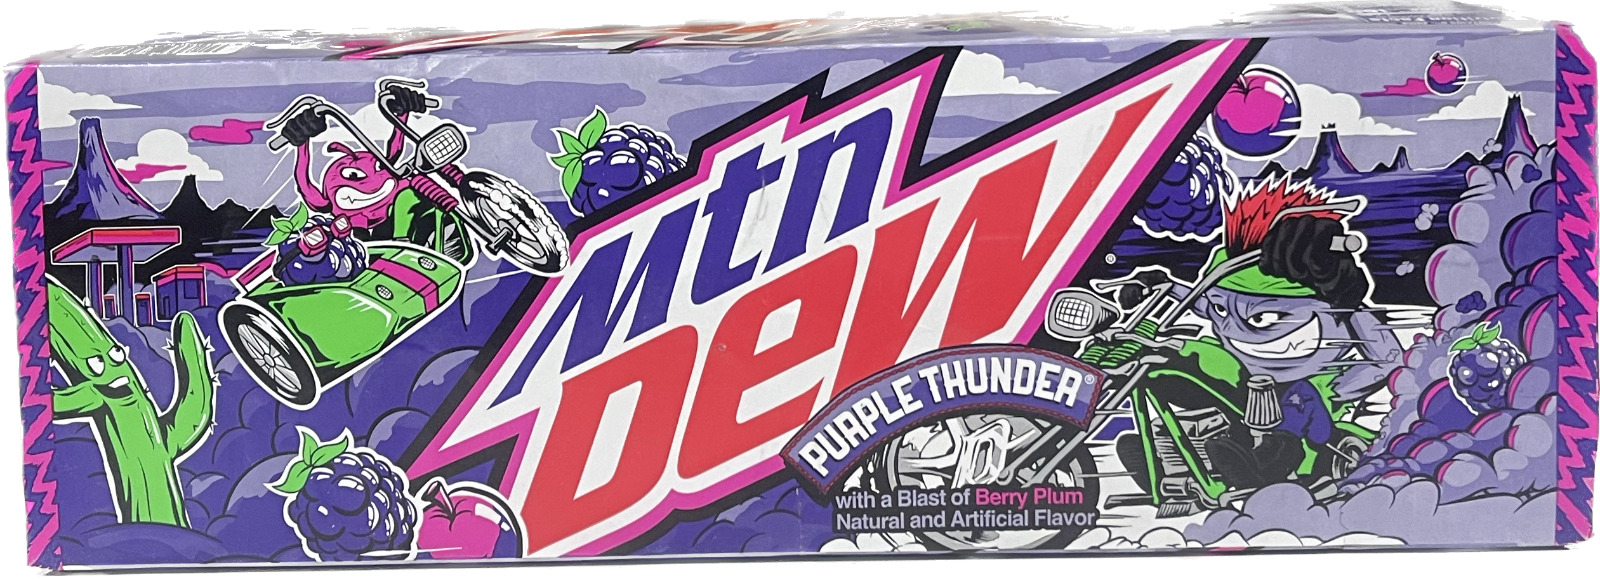 NEW MOUNTAIN MTN DEW PURPLE THUNDER FLAVORED SODA 12 PACK 12 FLOZ (355mL) CANS